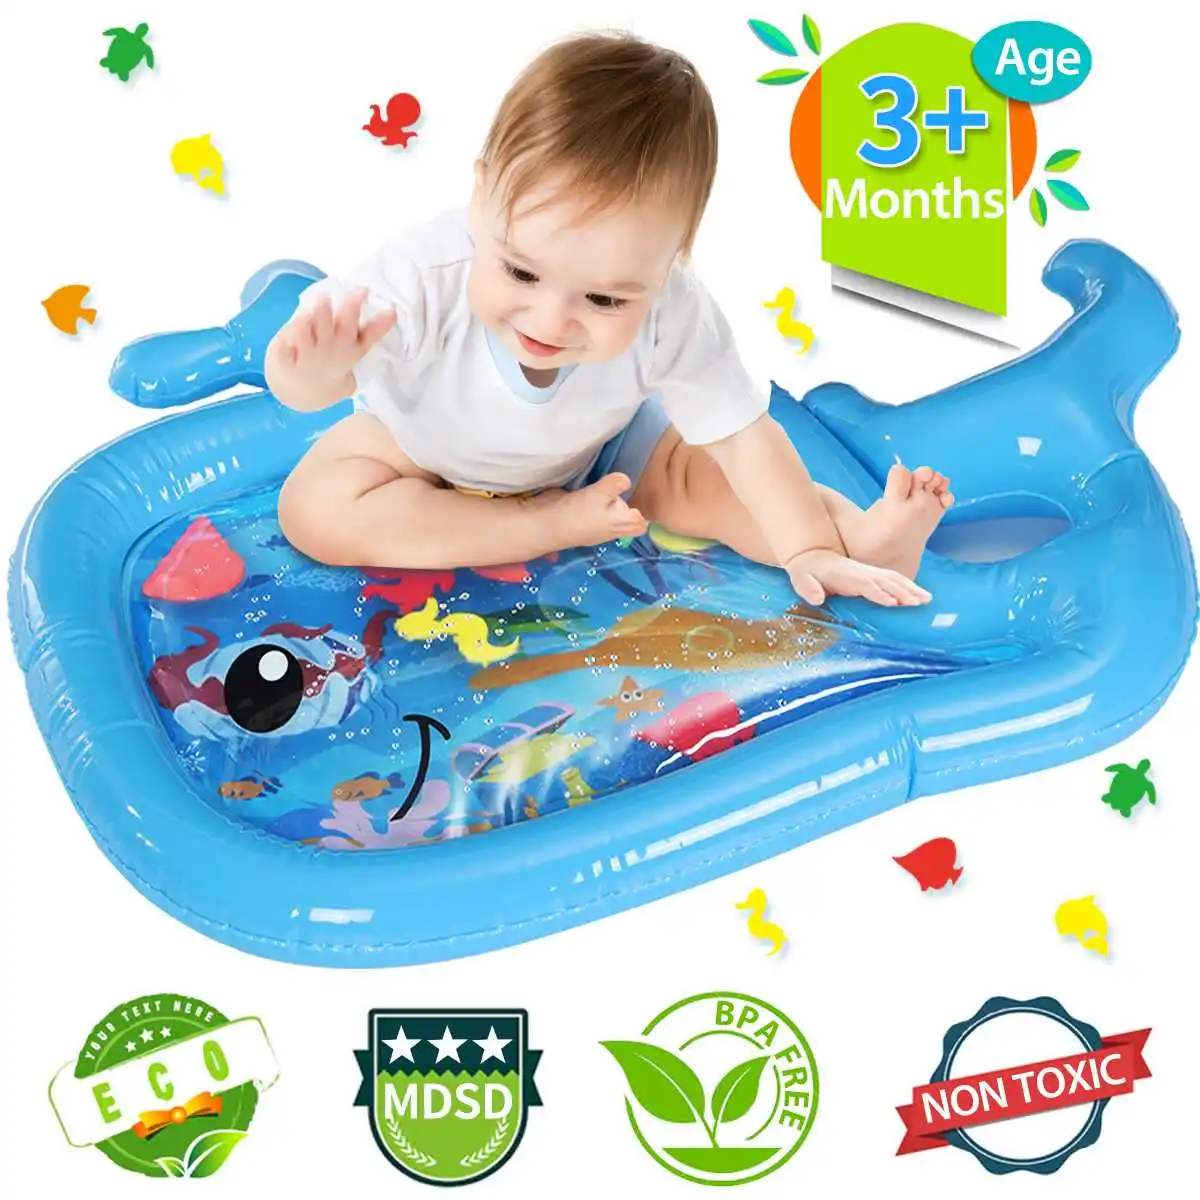 Children's Mat Baby Water Mat Inflatable Toys Kids Thicken PVC Playmat Toddler Activity Play Center Summer Toys for Babies